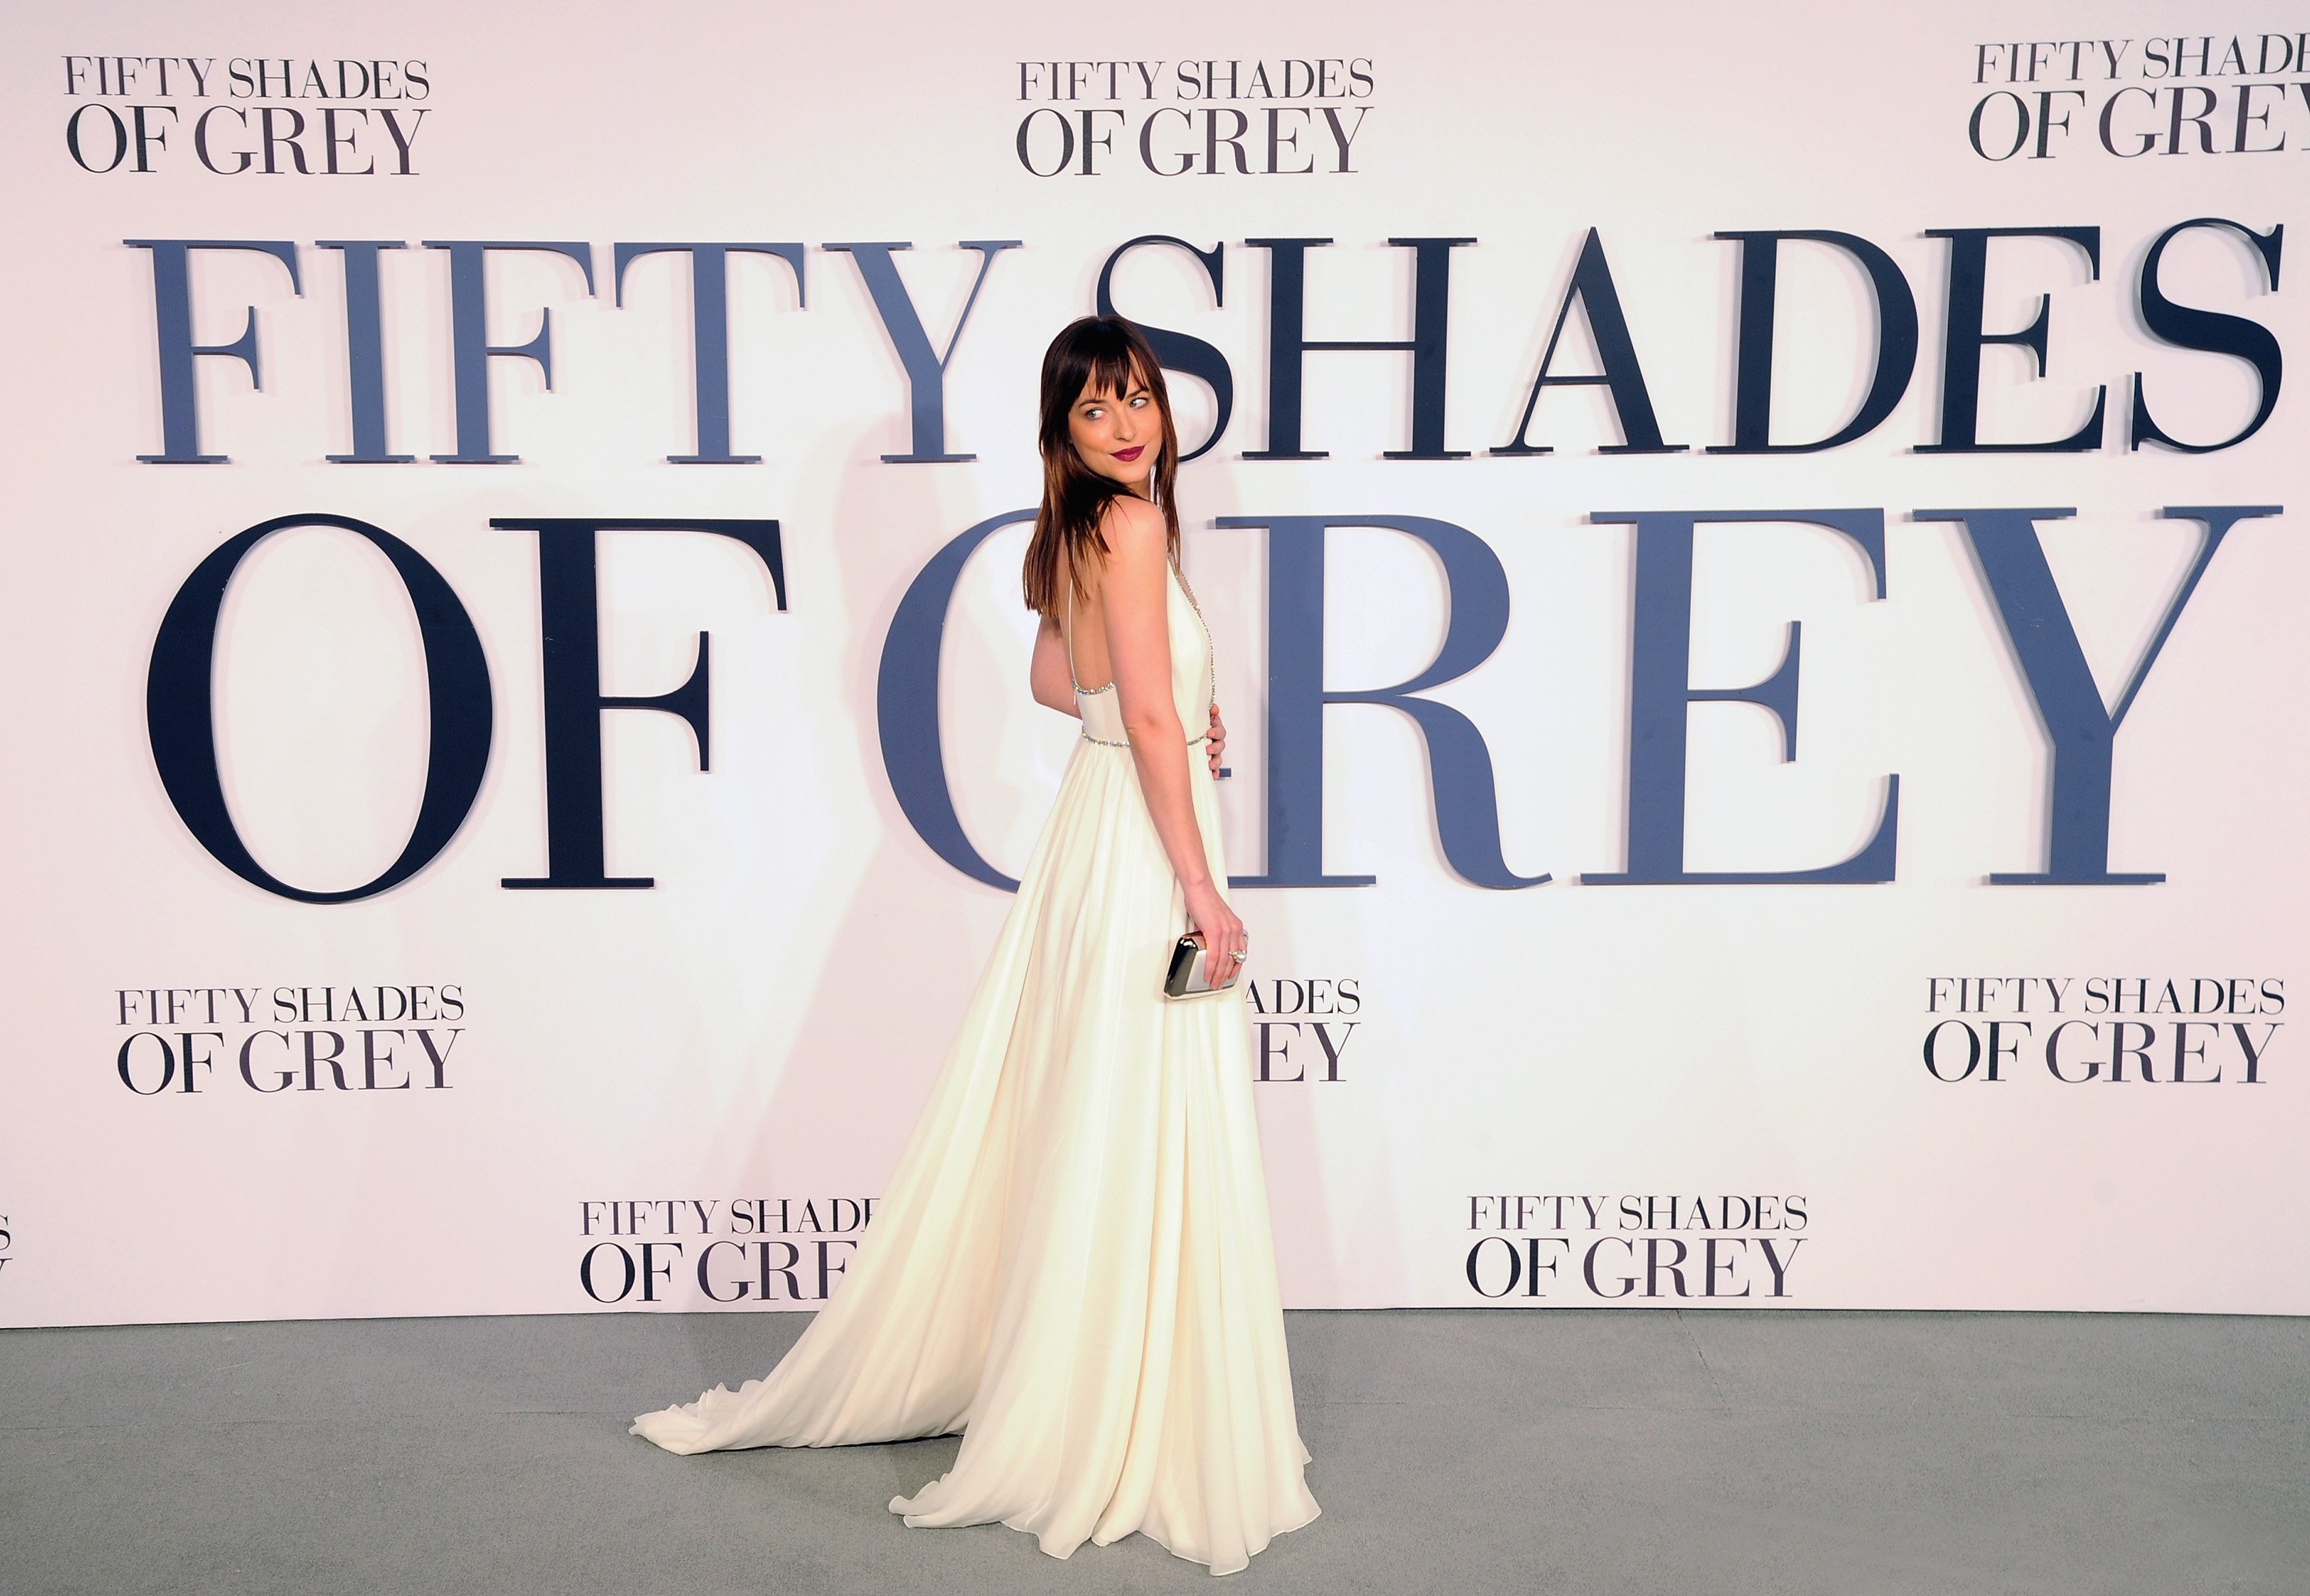 Dakota Johnson attends the UK Premiere of "Fifty Shades Of Grey" at Odeon Leicester Square on February 12, 2015 in London, England. | Source: Getty Images